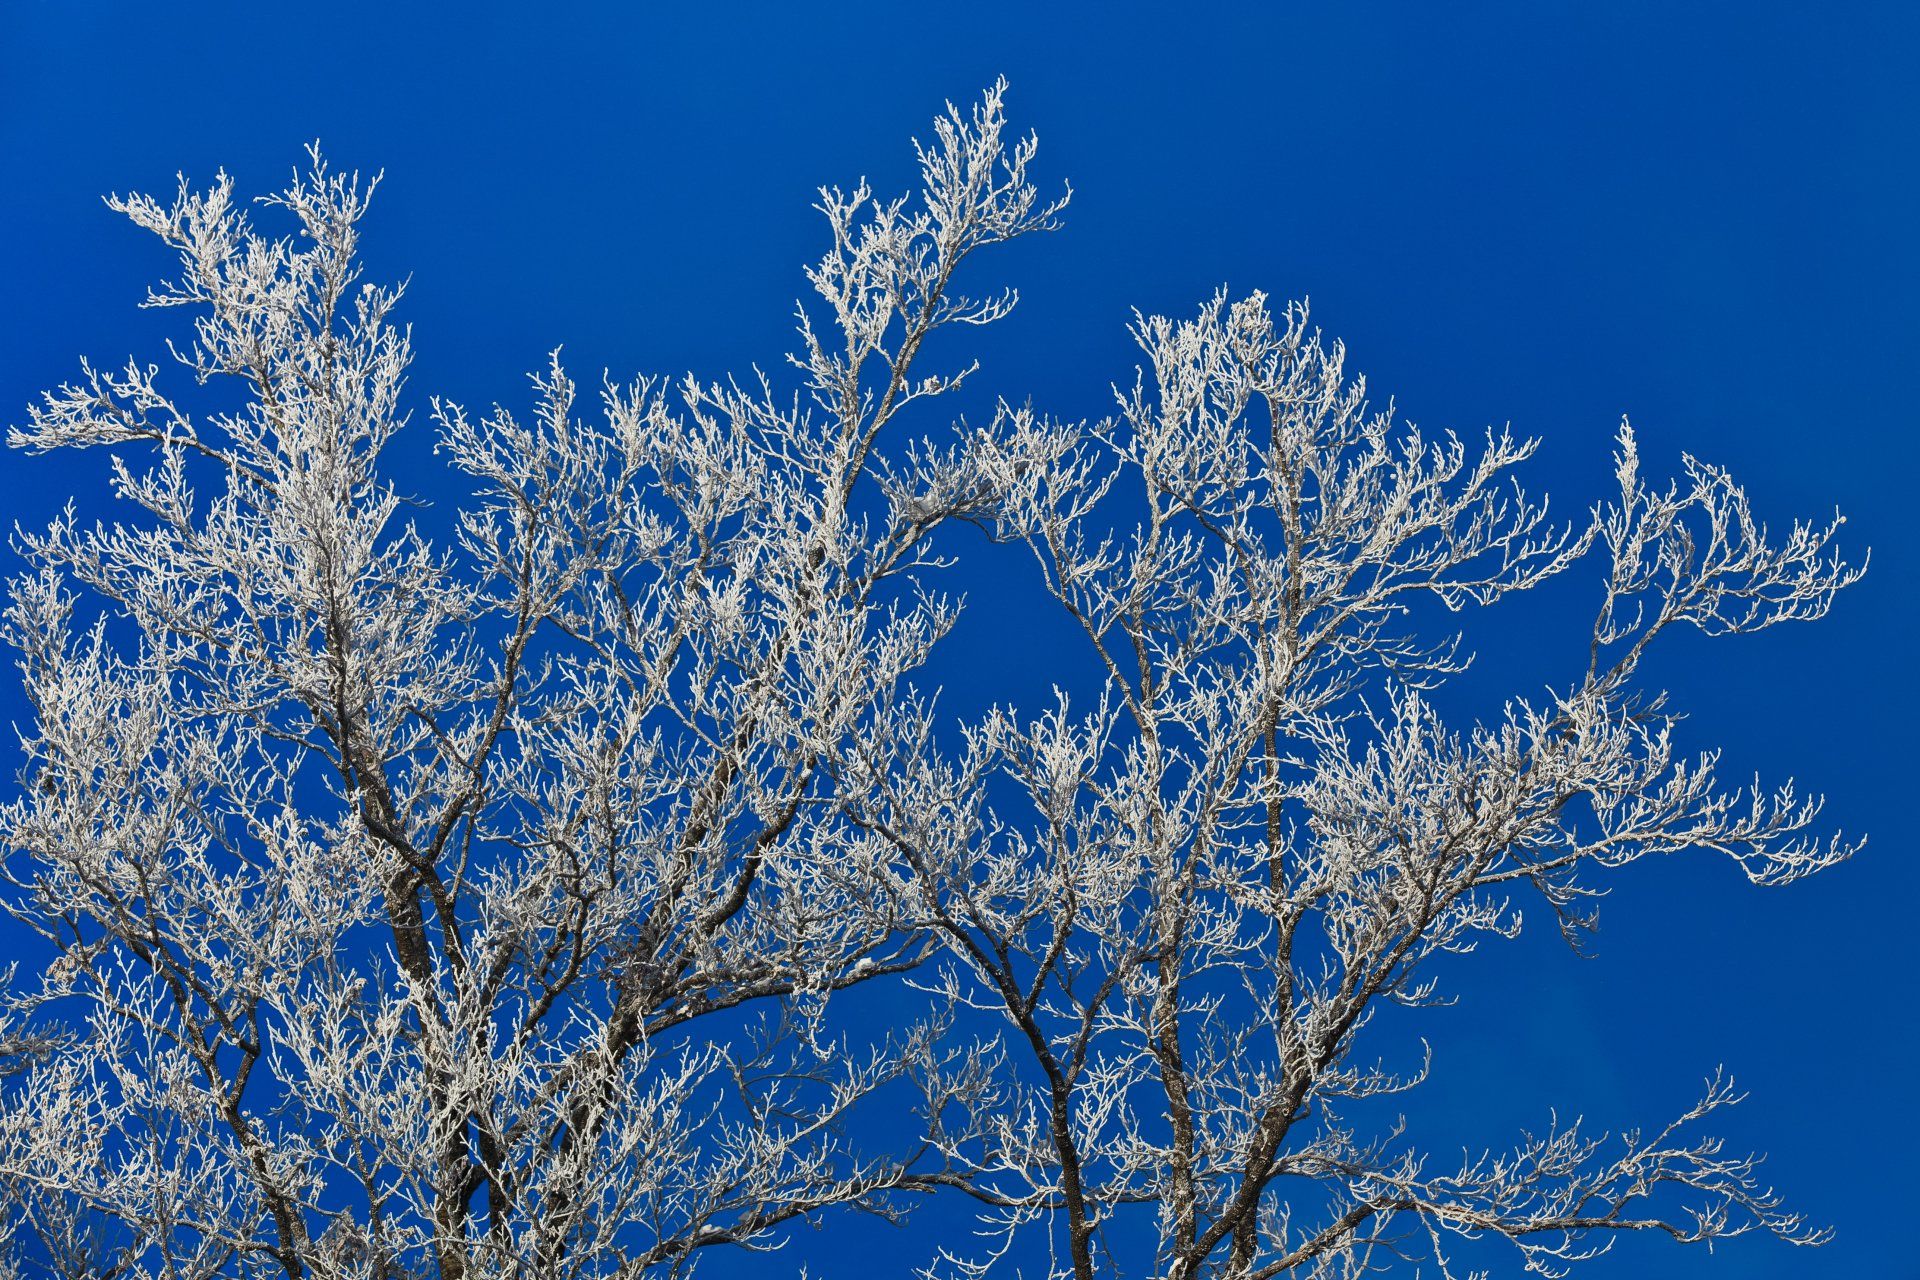 Read Braik's Tree Care's guide to preparing your trees for winter in mid-Missouri.